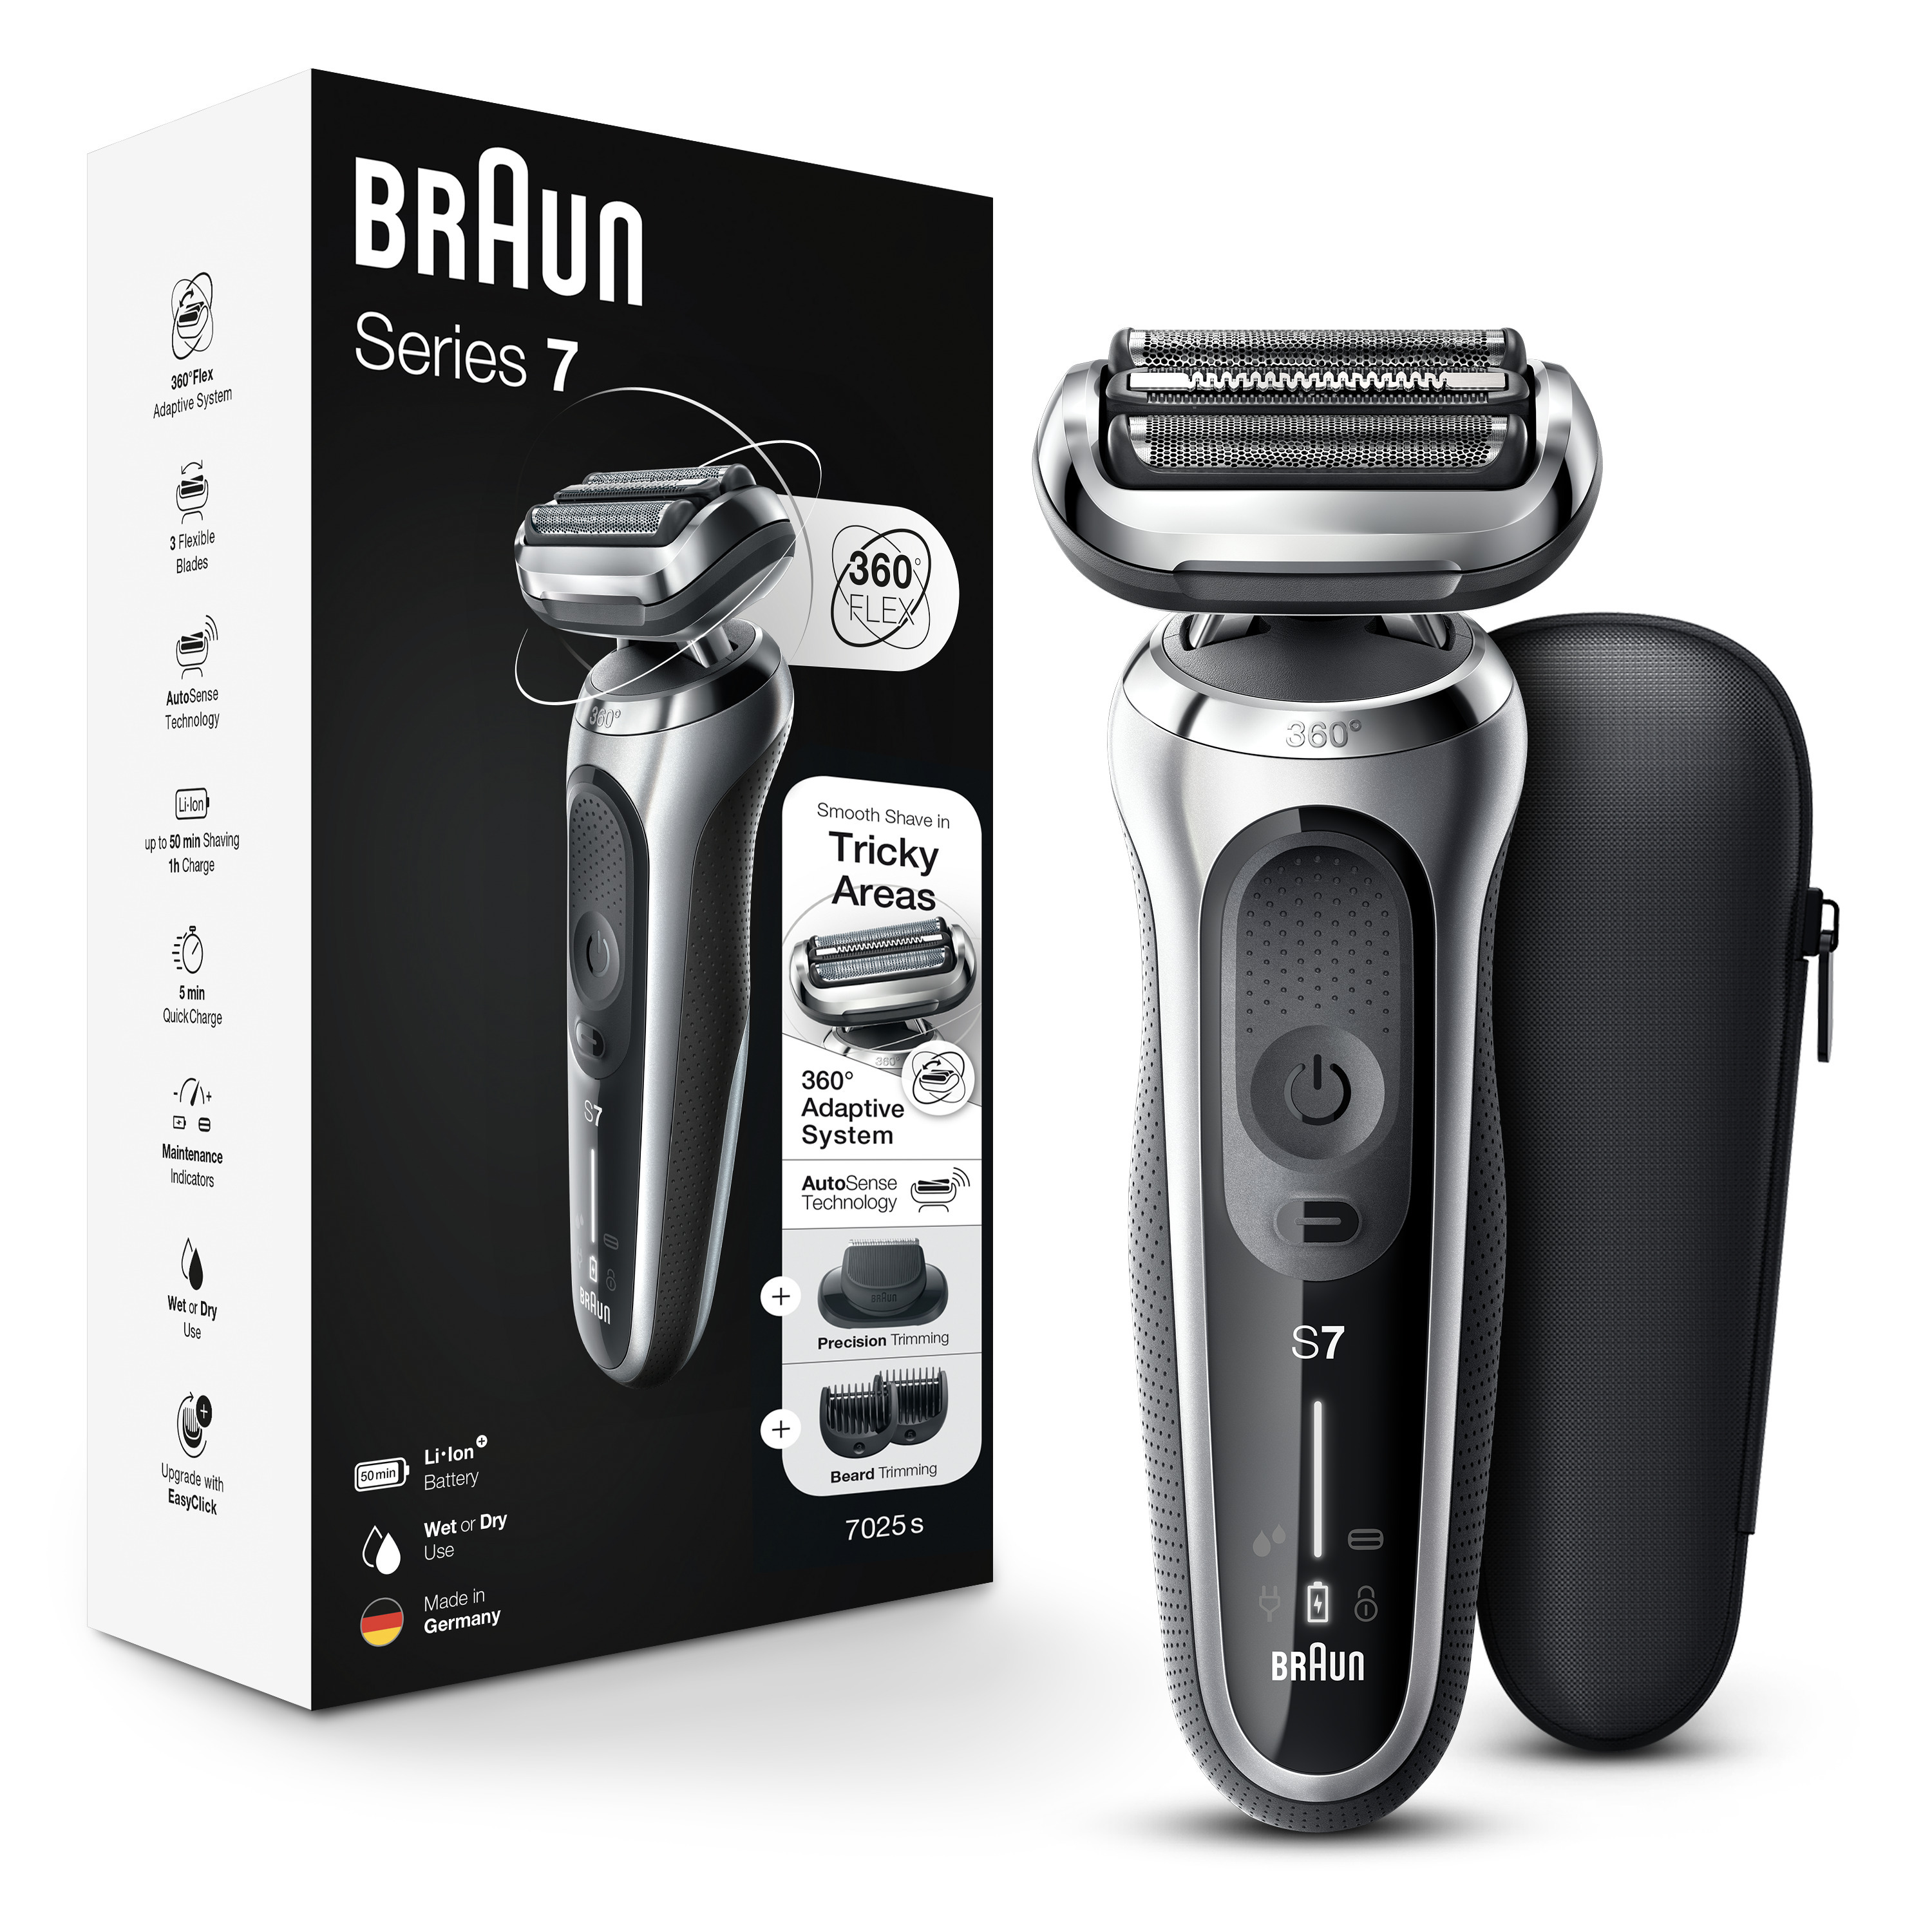 Braun Series 7 7025s Flex Rechargeable Wet Dry Men's Electric Shaver with Beard Trimmer - image 1 of 12